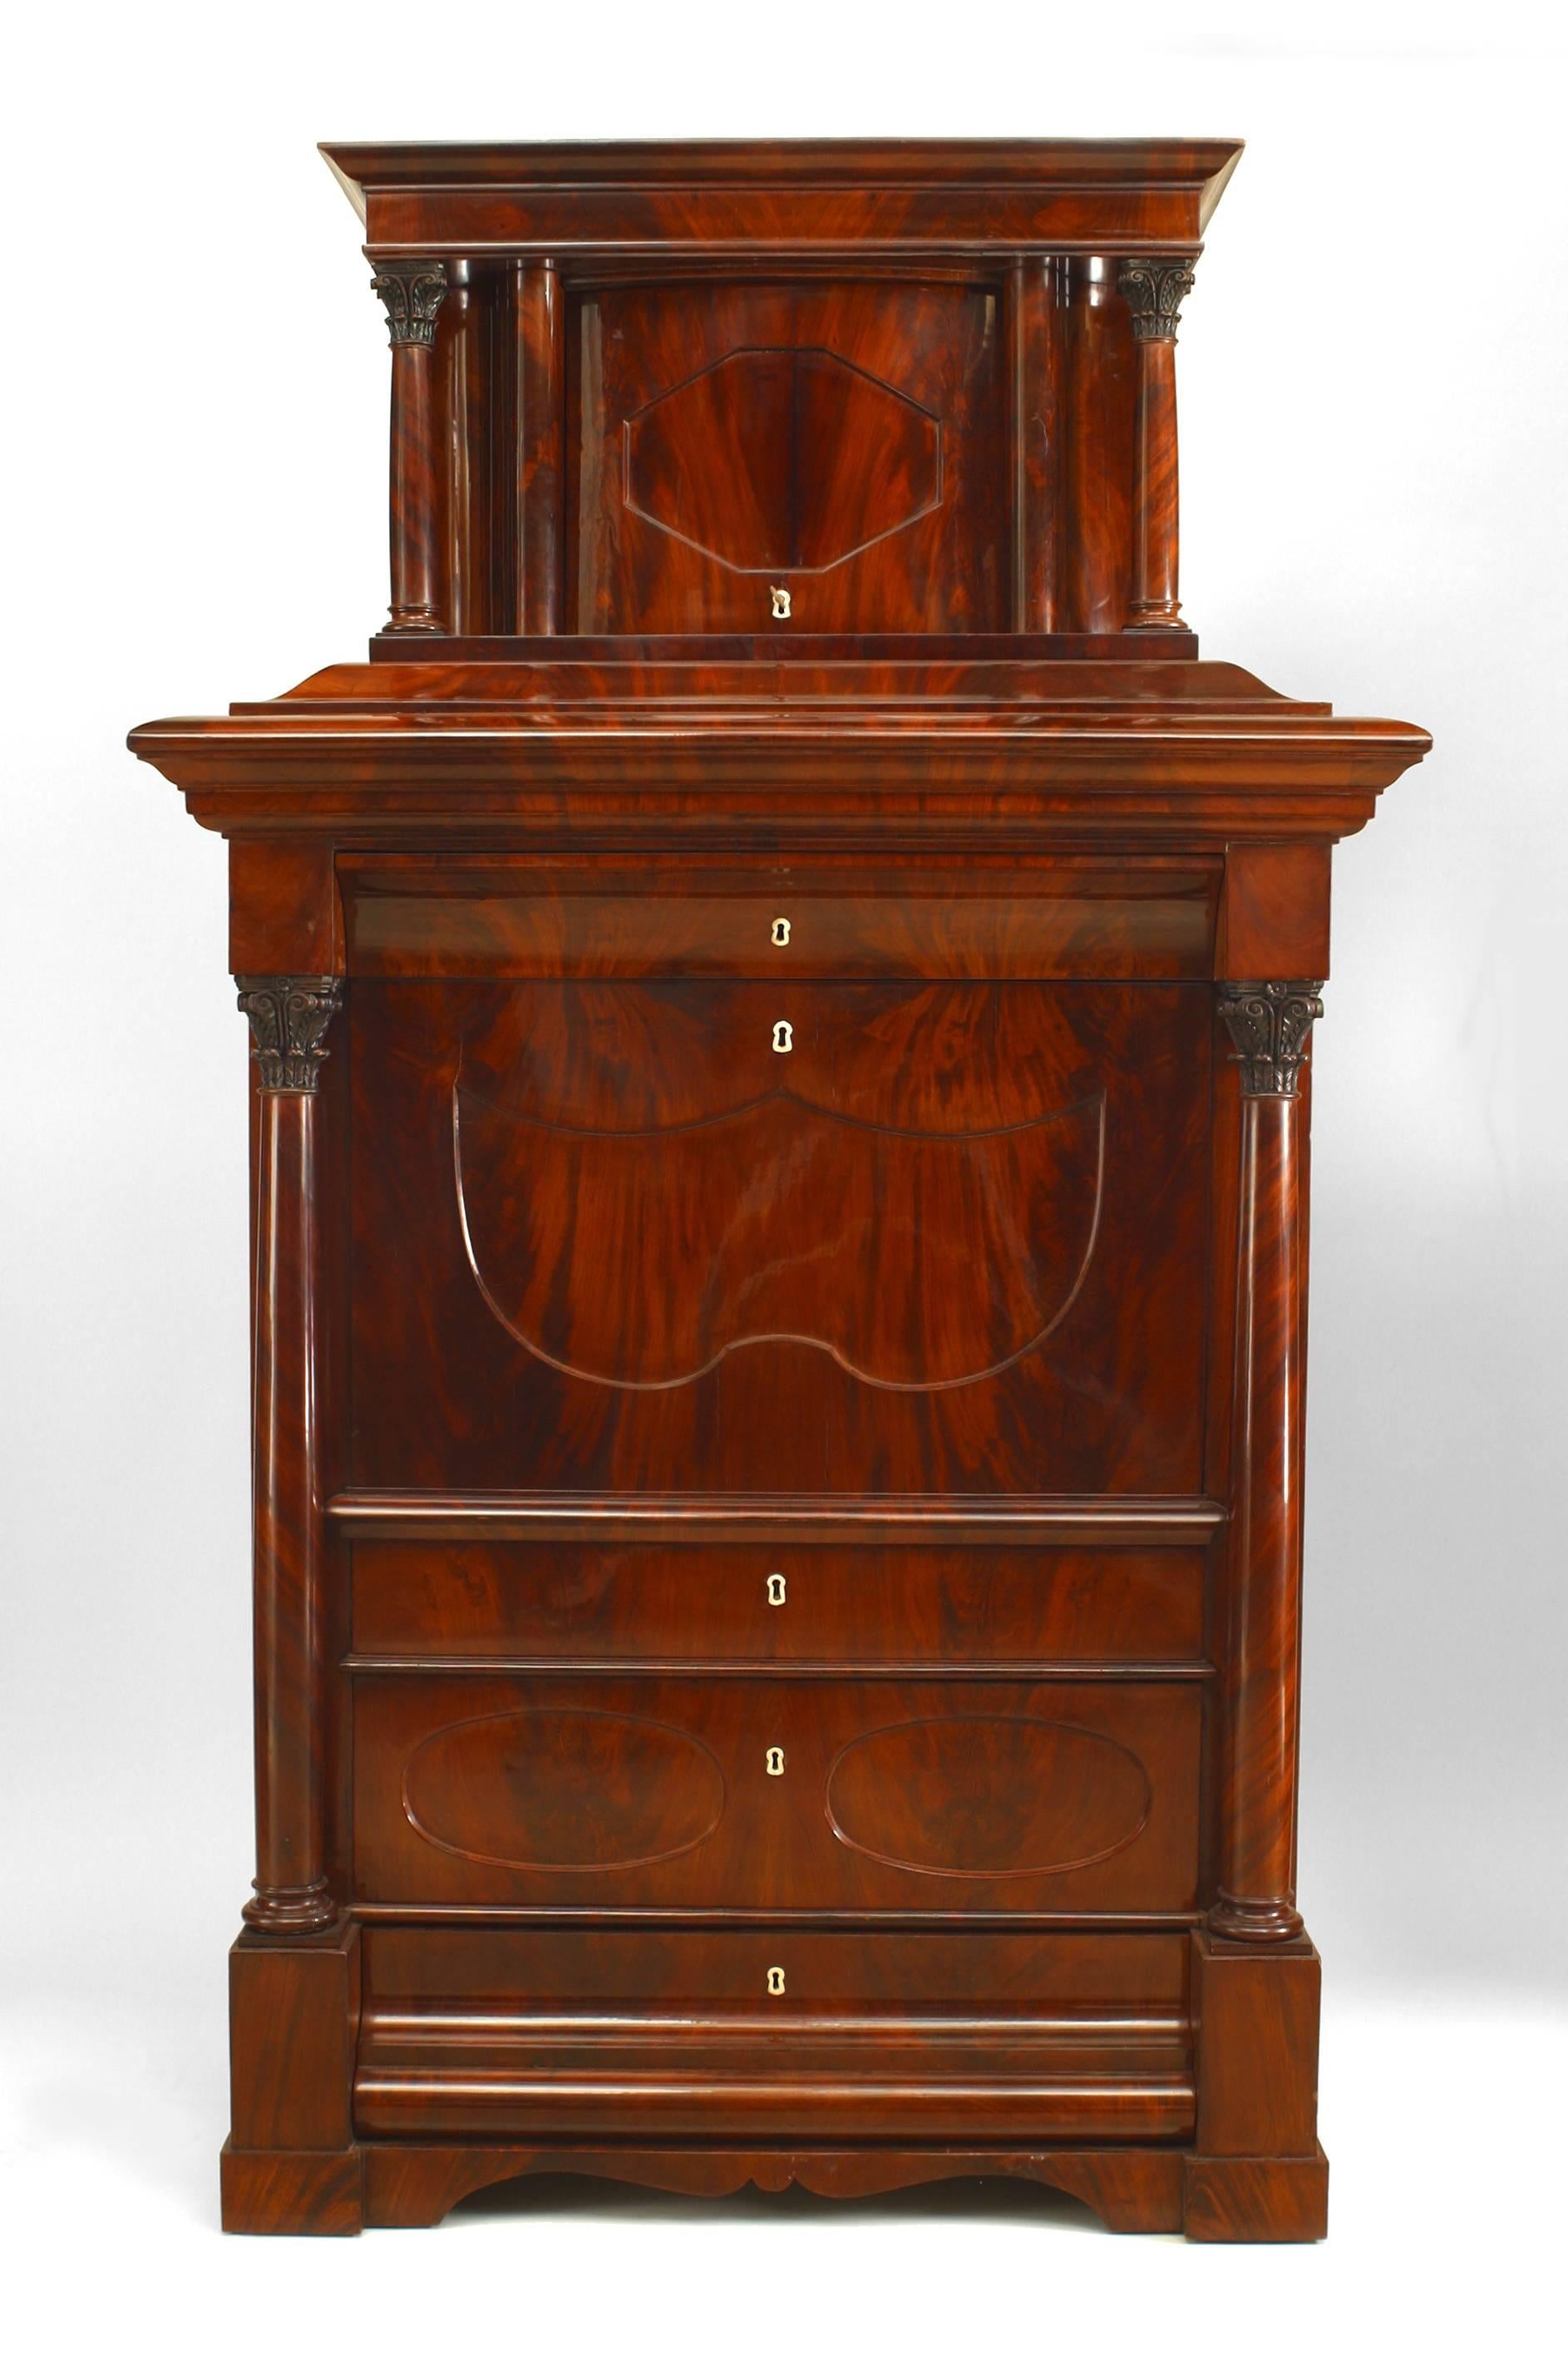 German Biedermeier (circa 1820) mahogany secretary cabinet with Corinthian columns on top and bottom section and a centered drop front revealing a series of drawers and columns
